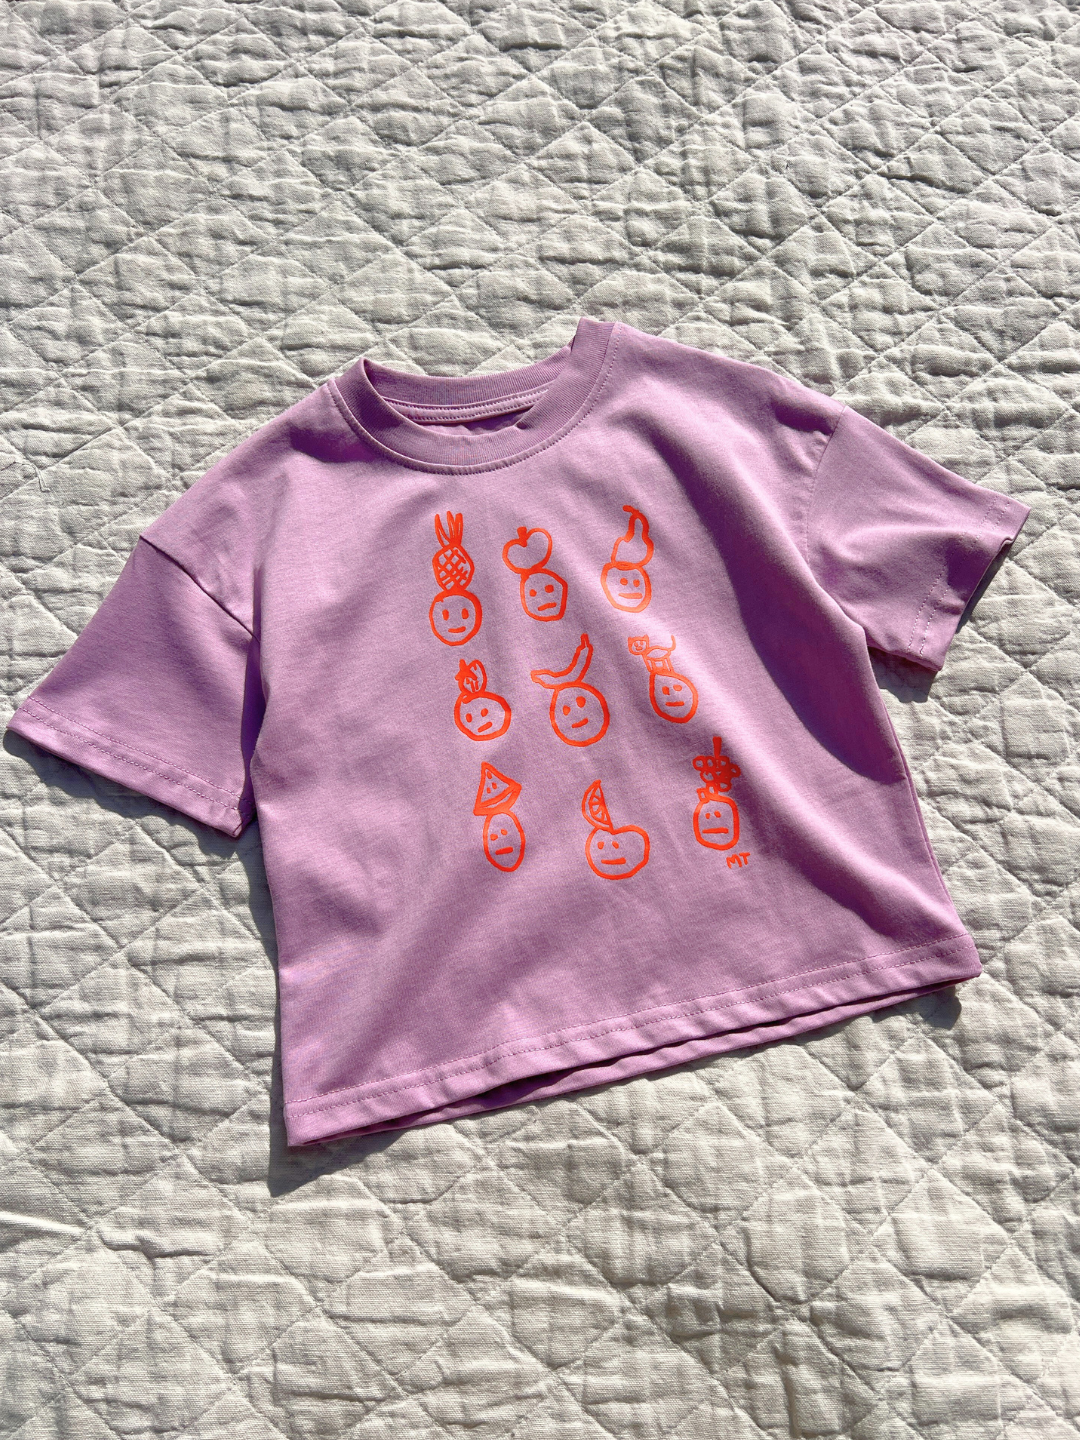 Violet |  A kids' Fruit Face tee in violet is laid flat on a quilt in the sun.